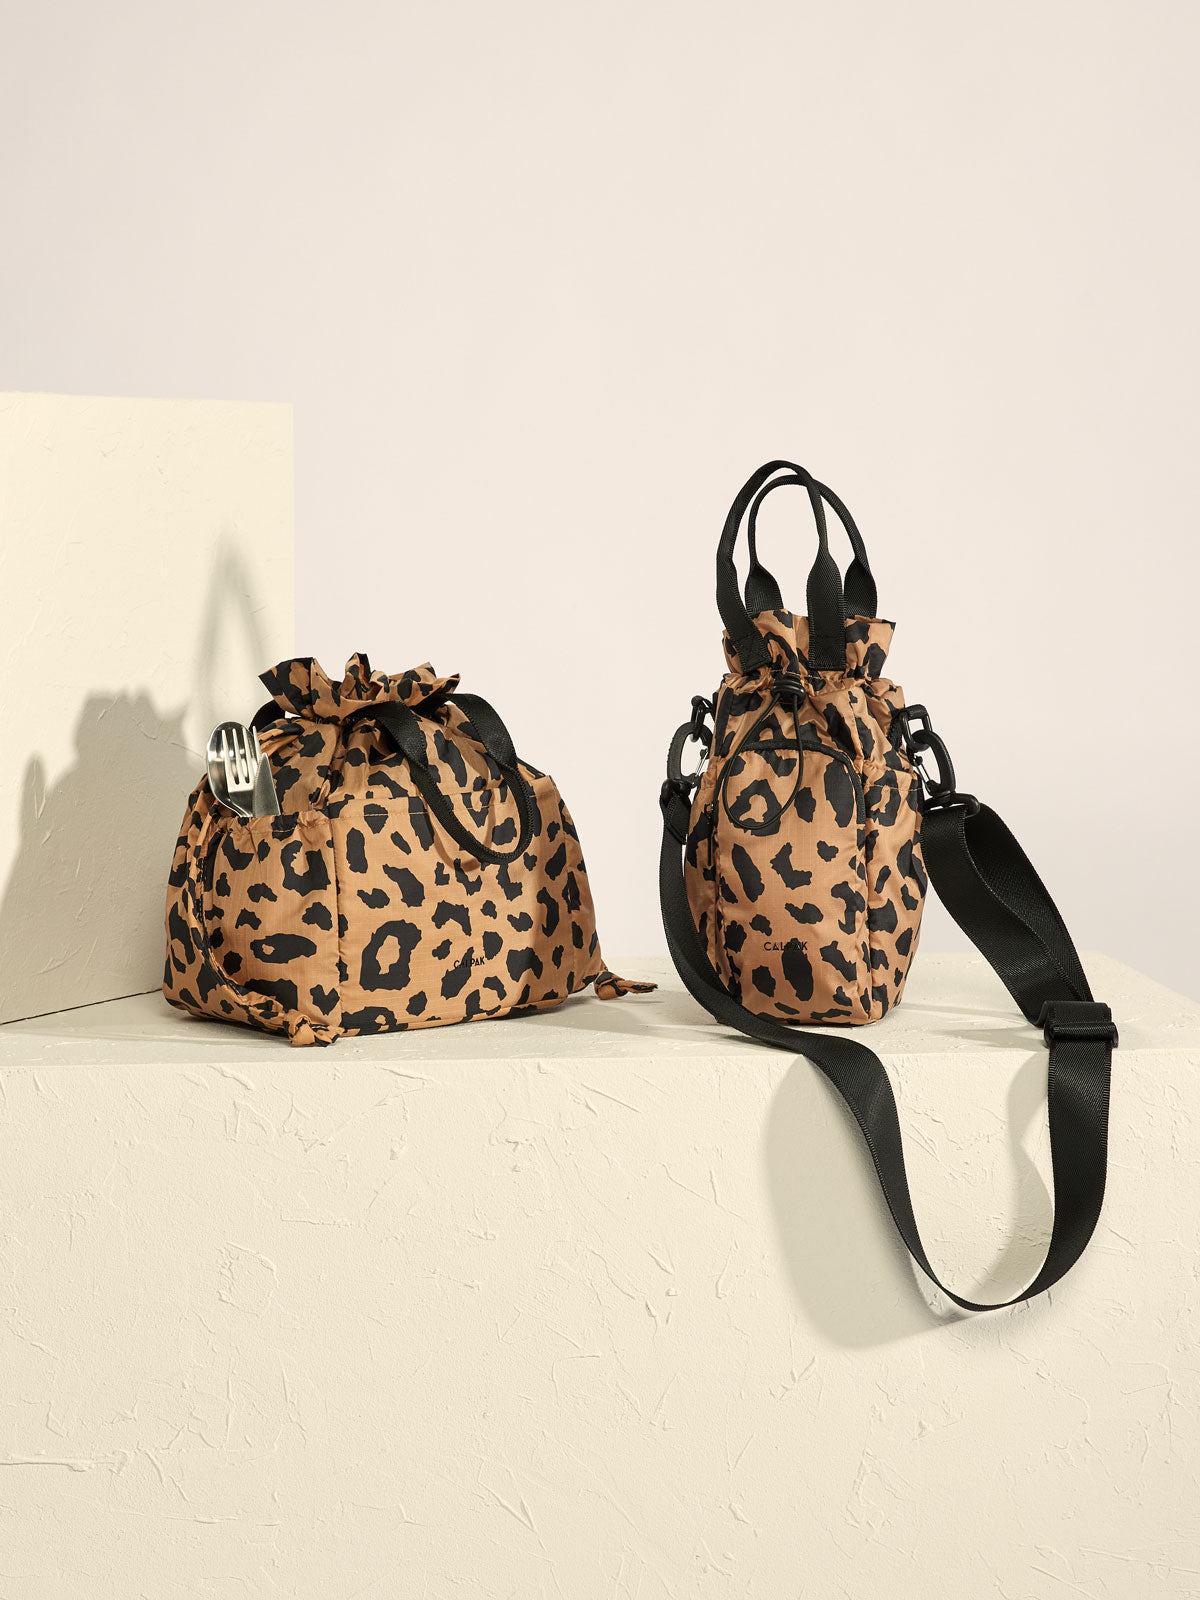 water bottle carrier with crossbody strap in cheetah